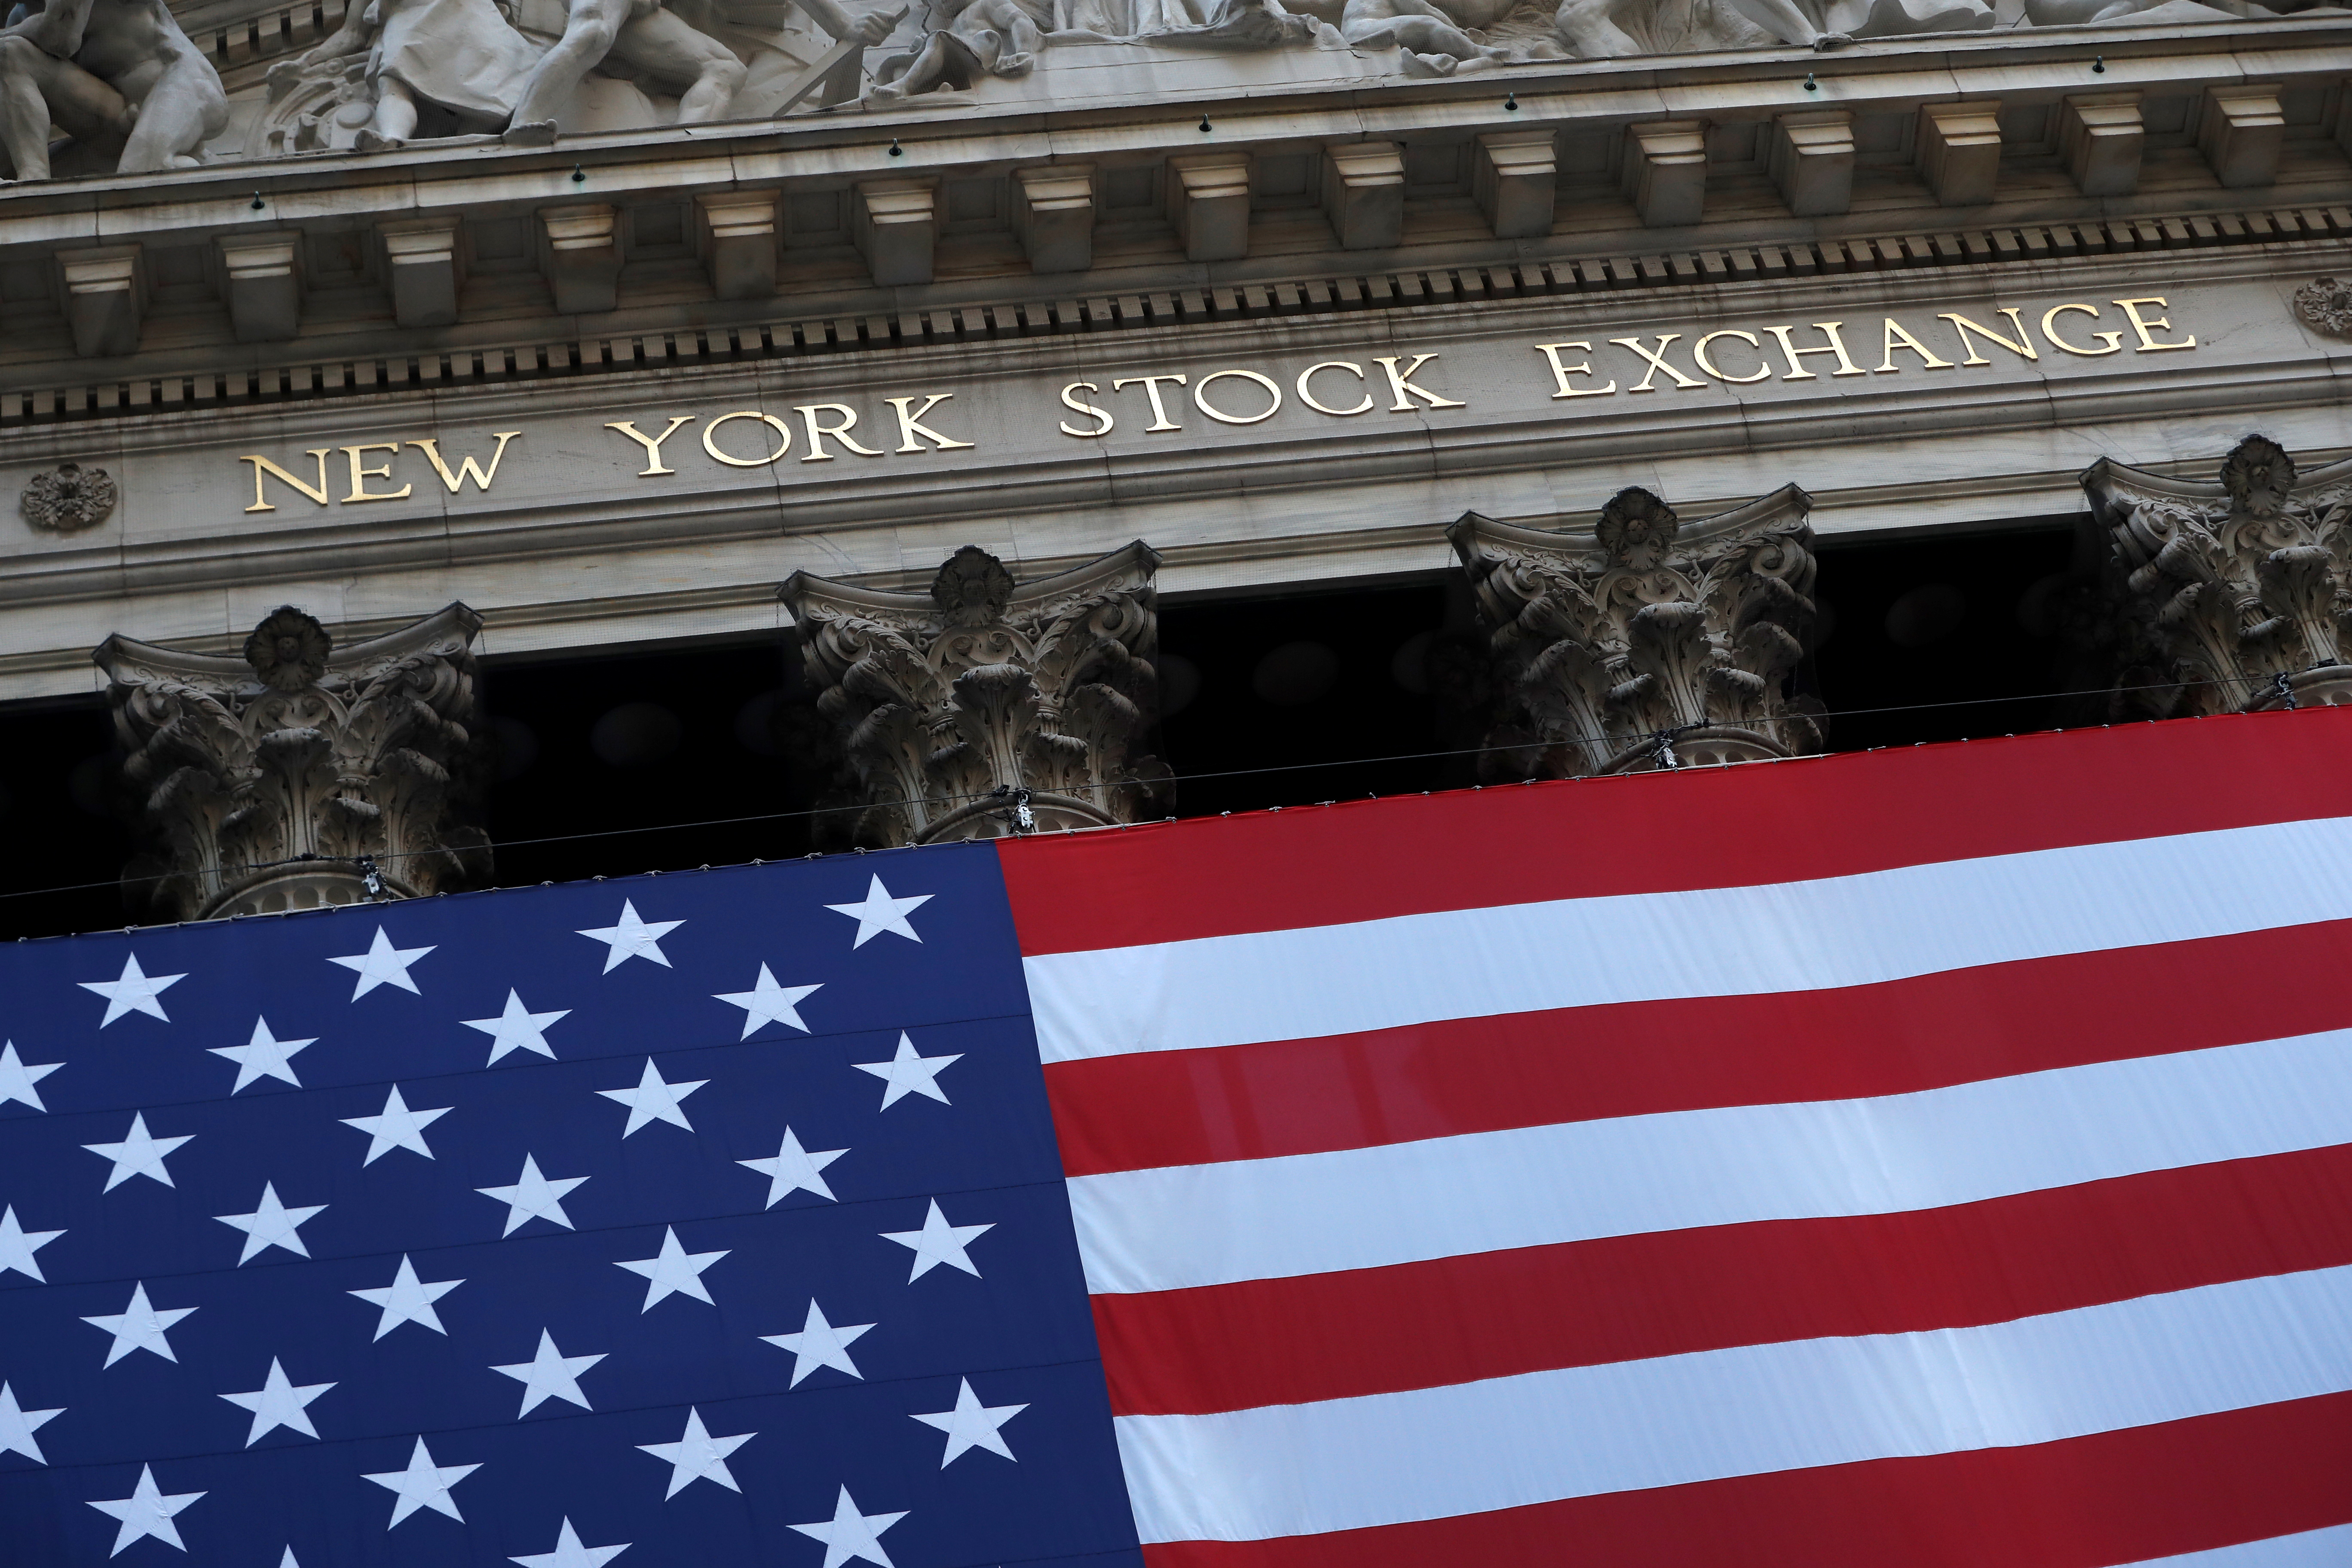 The U.S. flag is seen on the New York Stock Exchange (NYSE) following Election Day in Manhattan, New York City